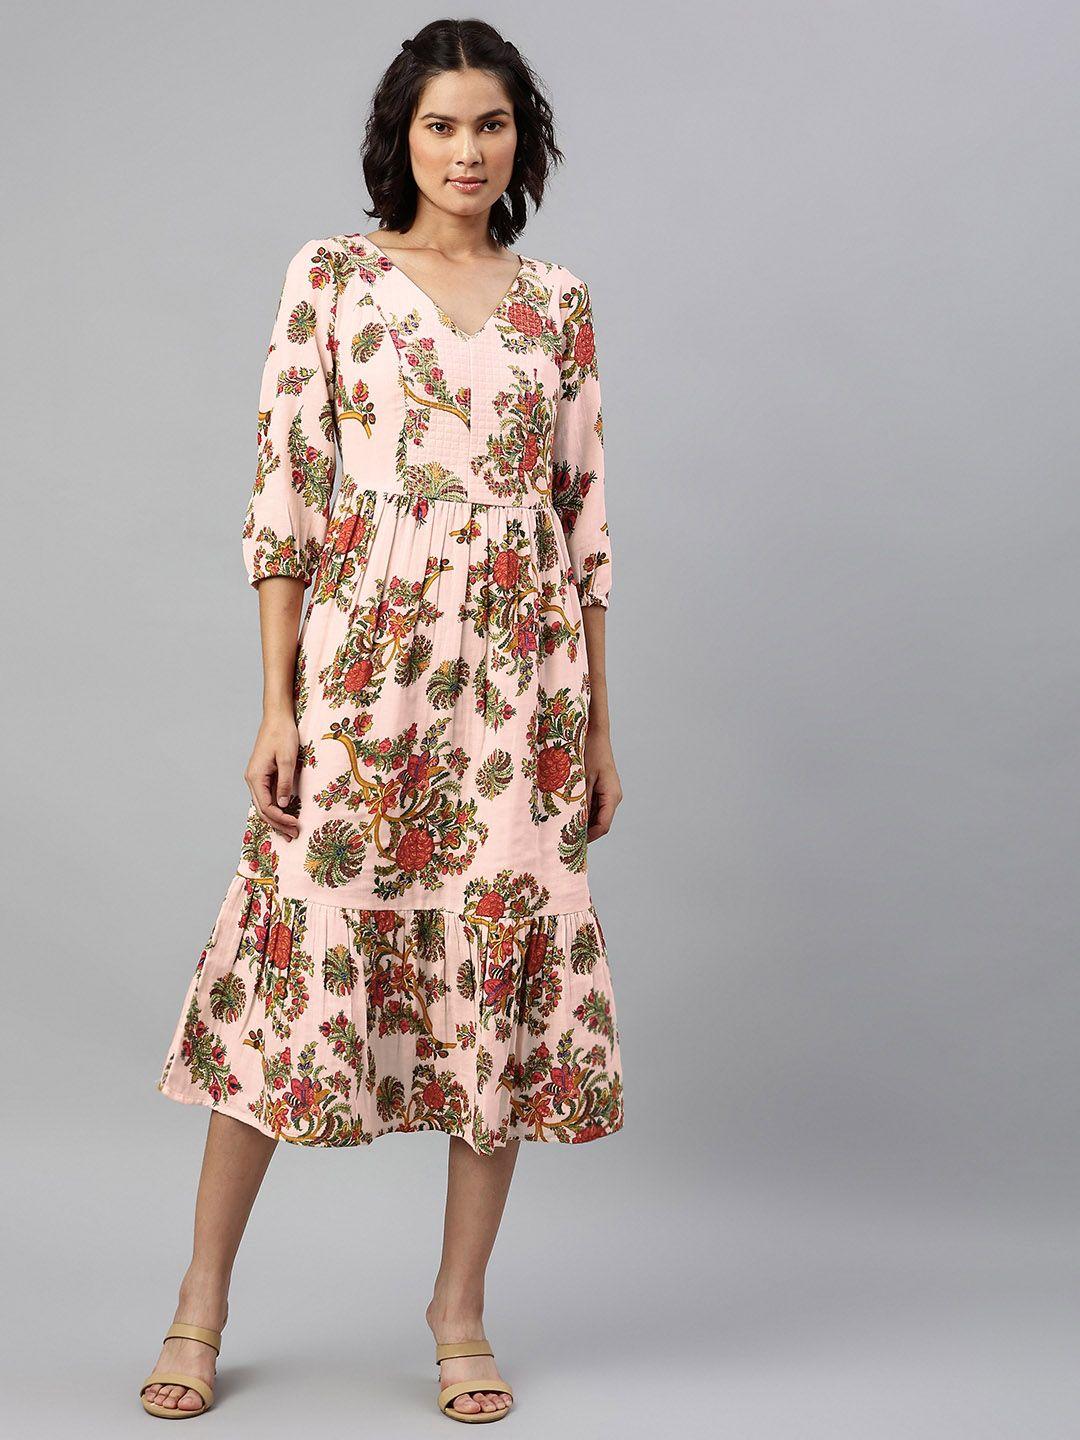 marks-&-spencer-off-white-&-red-floral-a-line-midi-dress